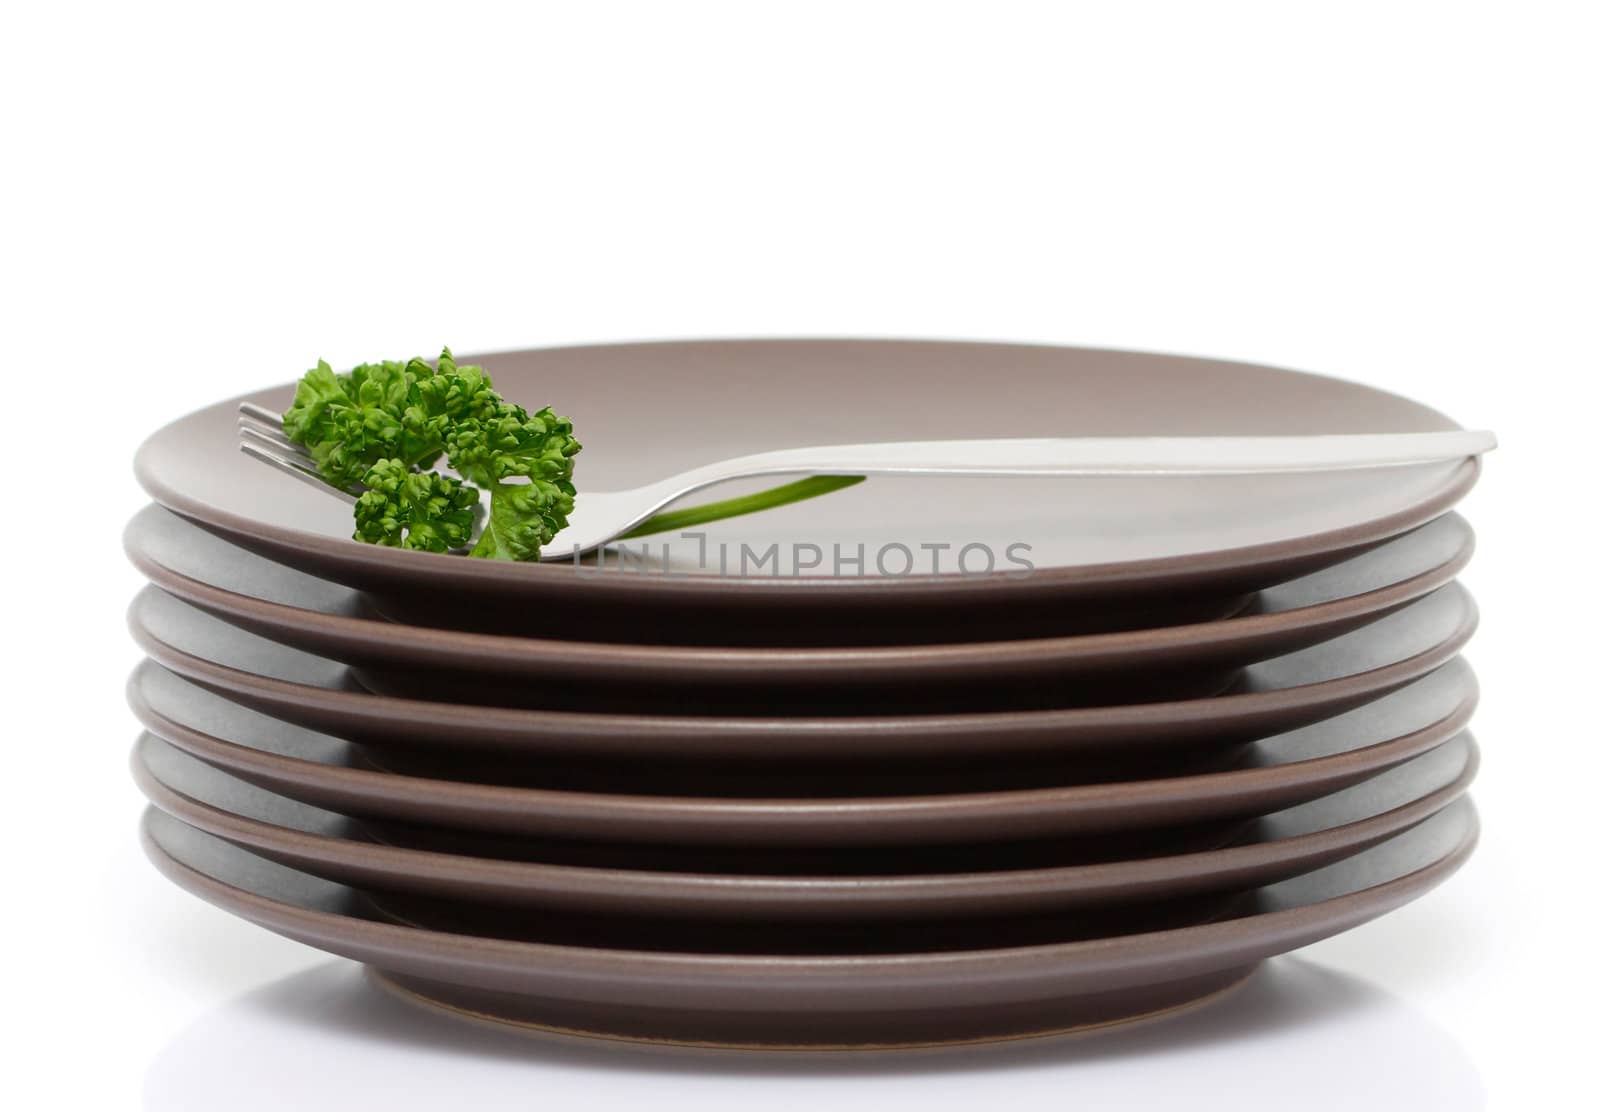 Plates, fork and parsley by Olinkau